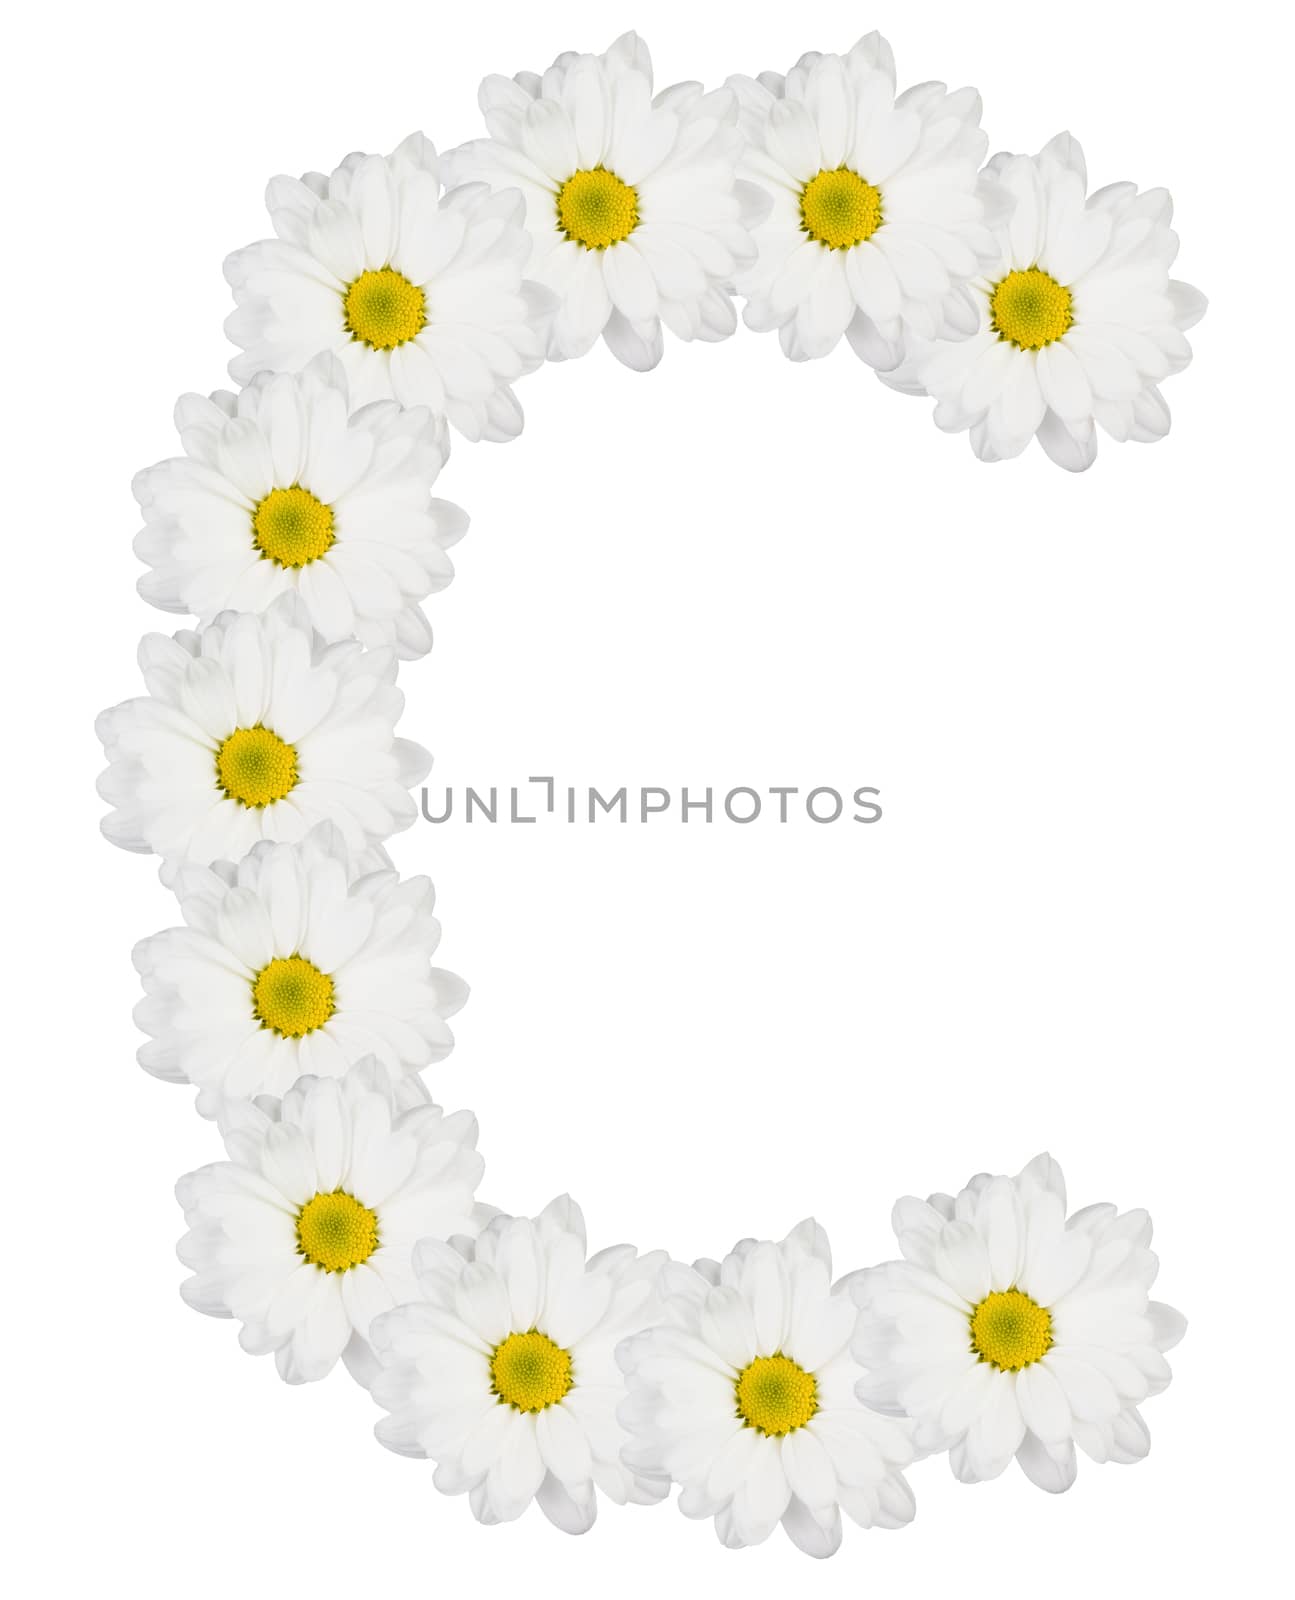 Letter C made from white flowers